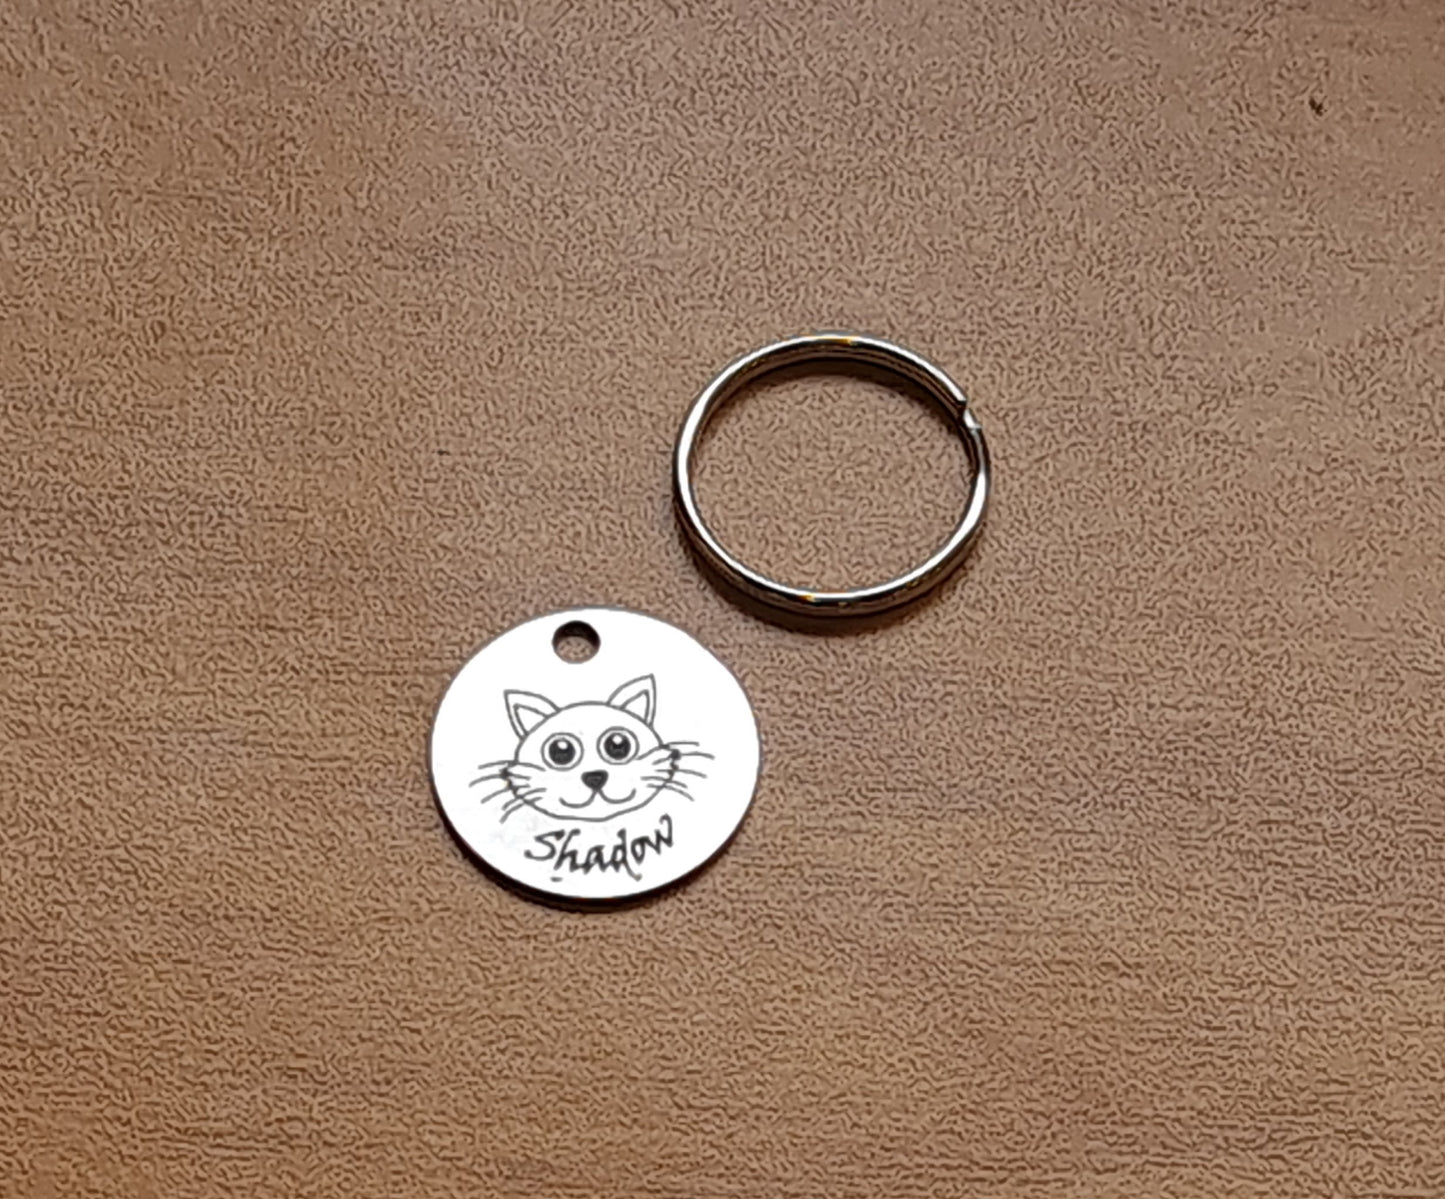 20mm Engraved Stainless Steel "Cat Face" Pet ID Tag / ID Disc